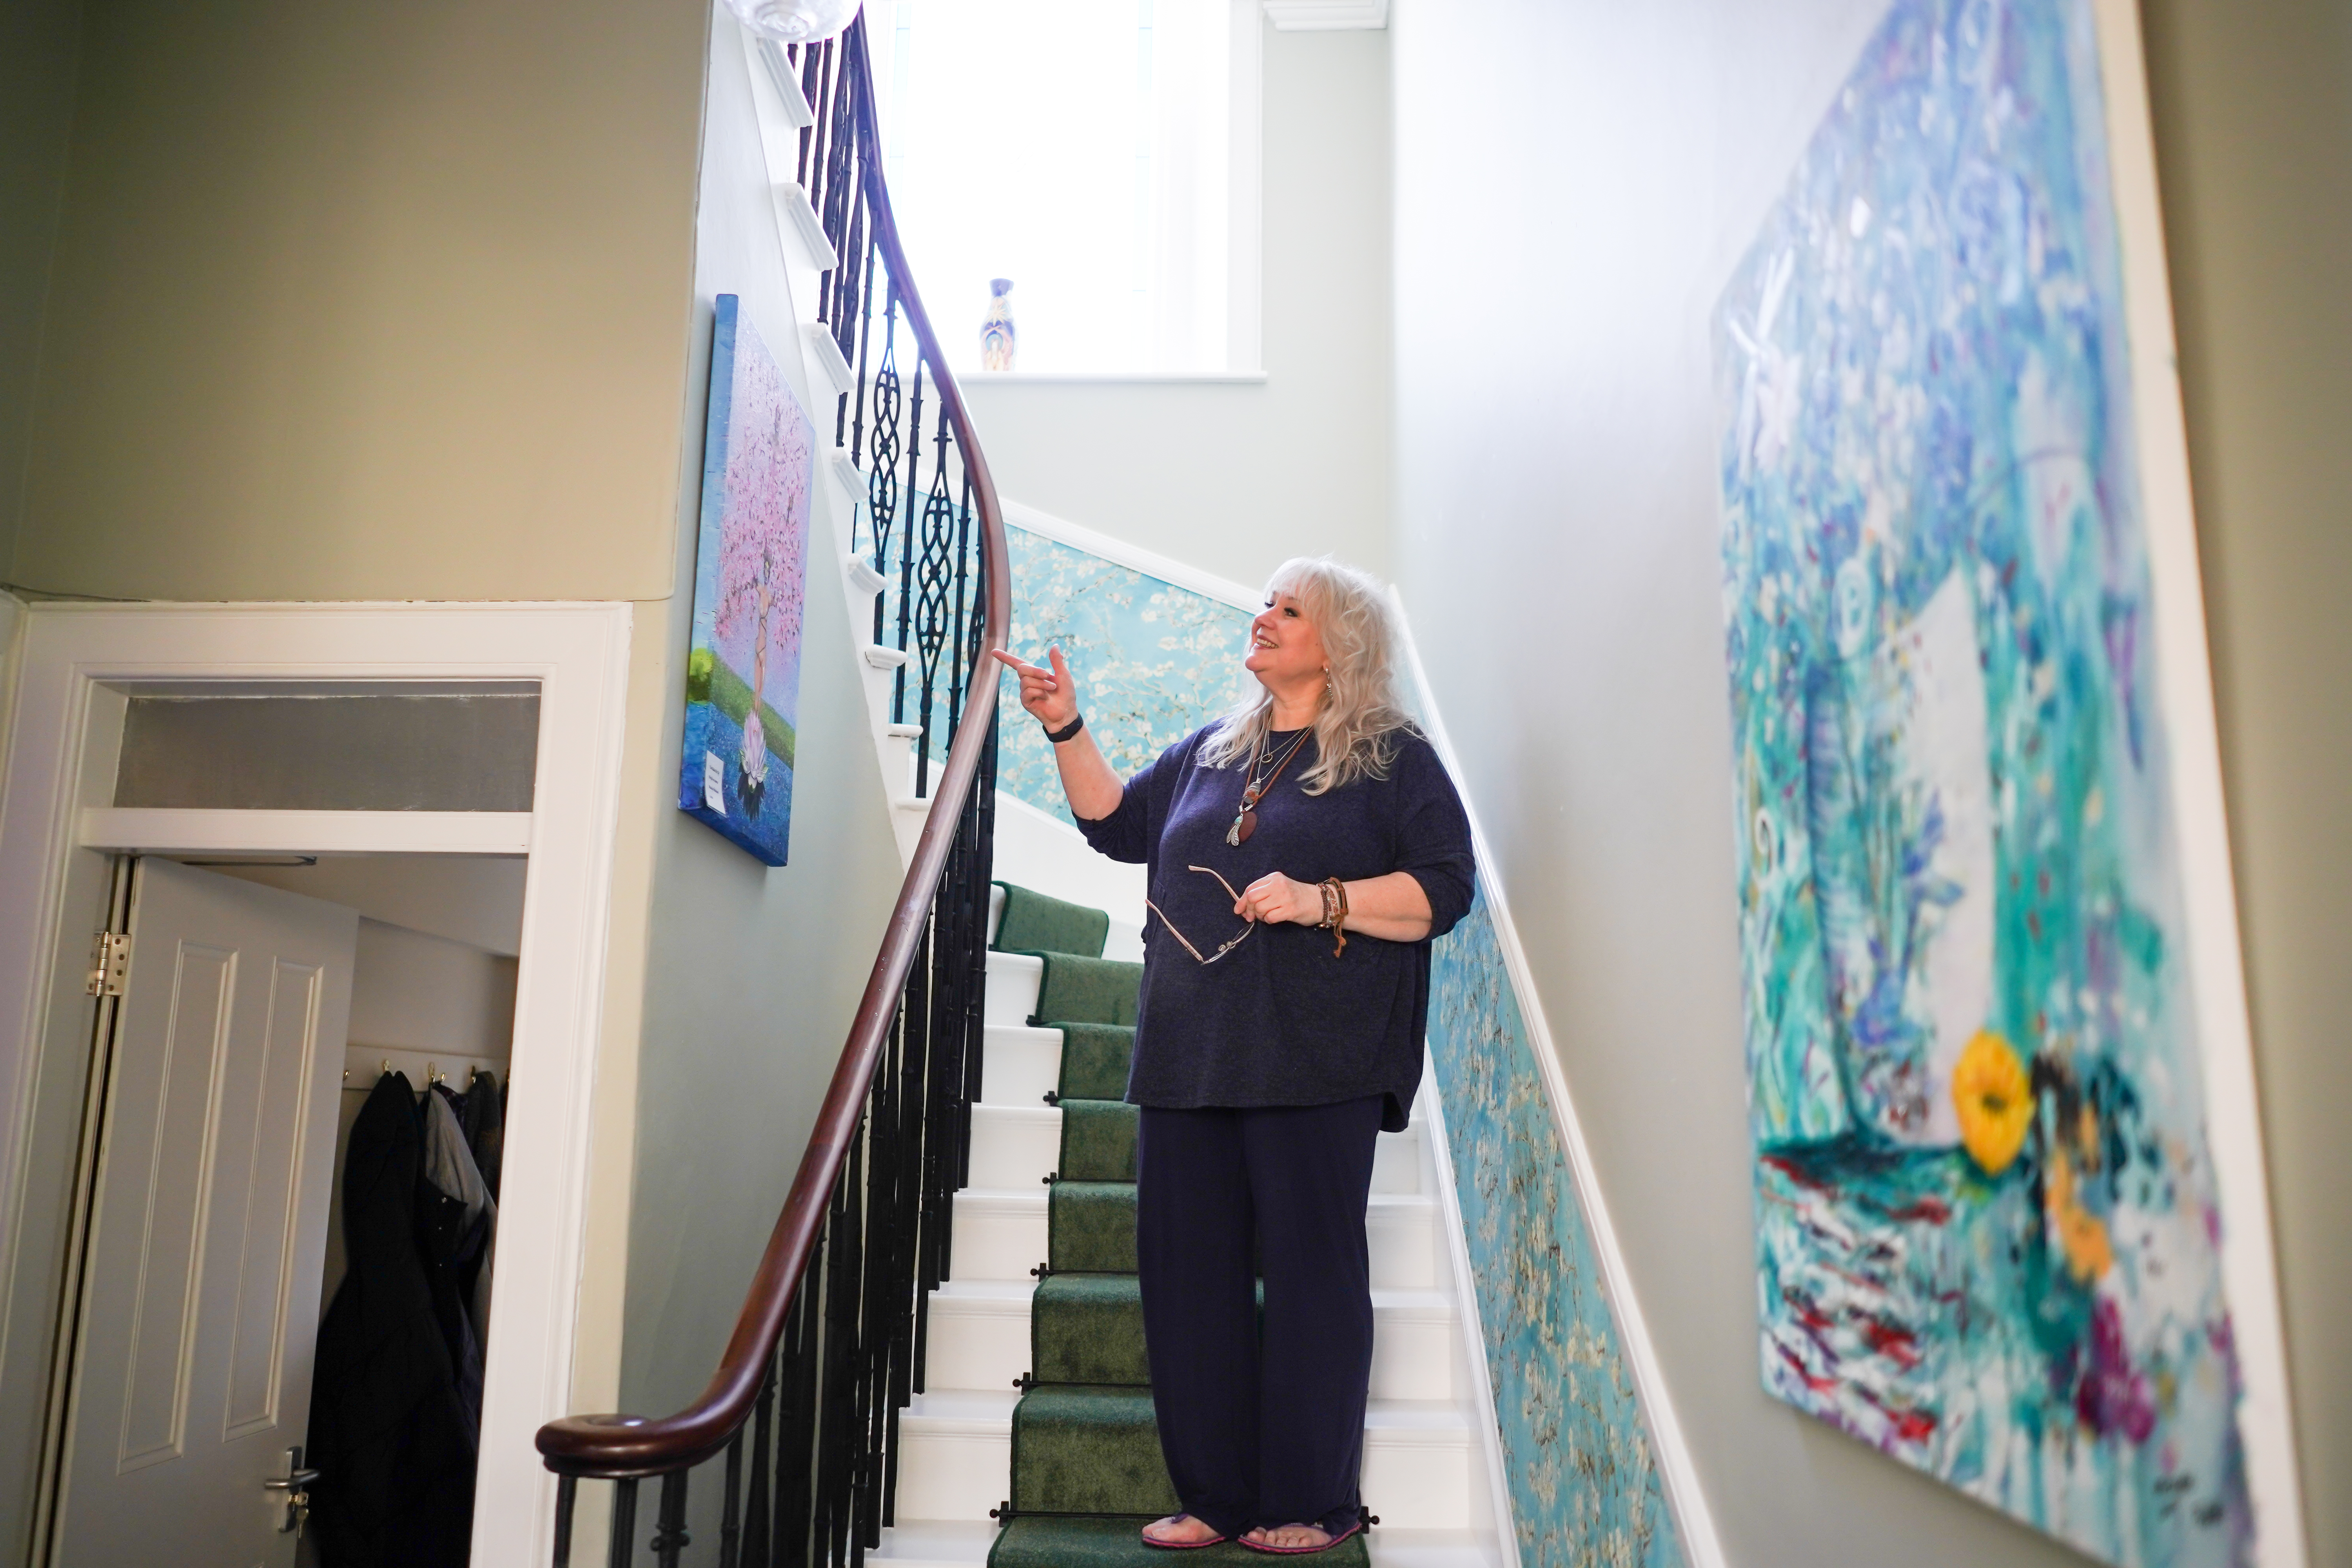 Pic of a woman standing on a stairway pointing at a painting